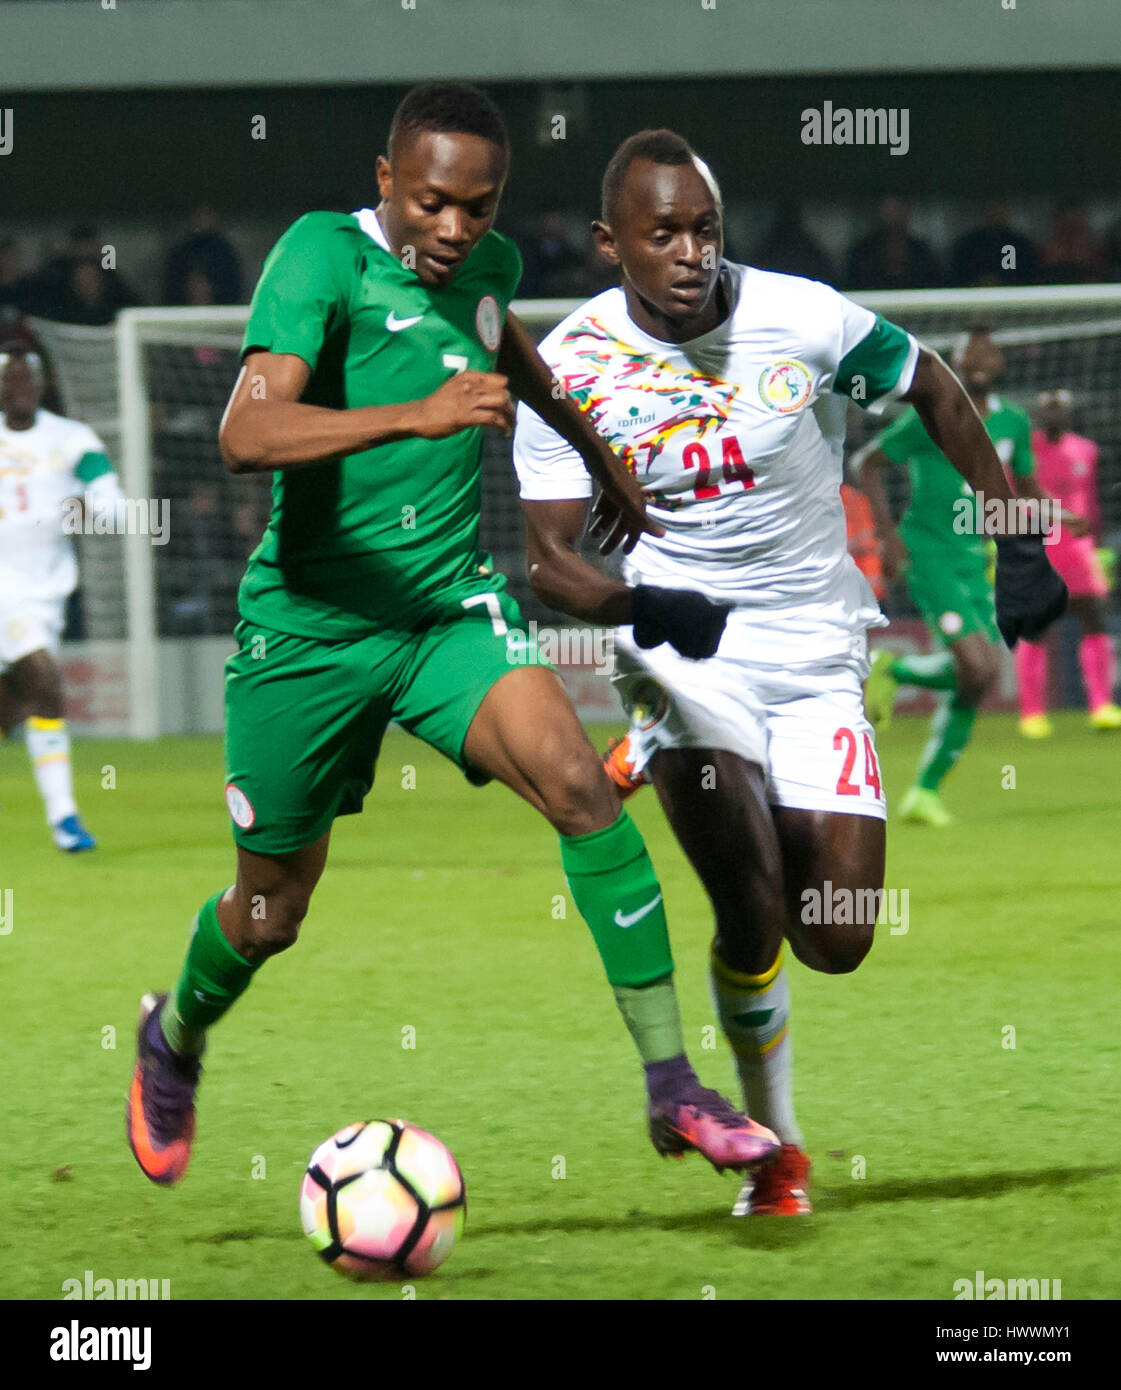 The Hive, Barnet,  England. 23rd March 2017. Ahmed Musa of Nigeria battles for the ball with Adama Mbengue of Senegal during the International Friendly match between Nigeria and Senegal. Michael Tubi / Alamy Live News Stock Photo